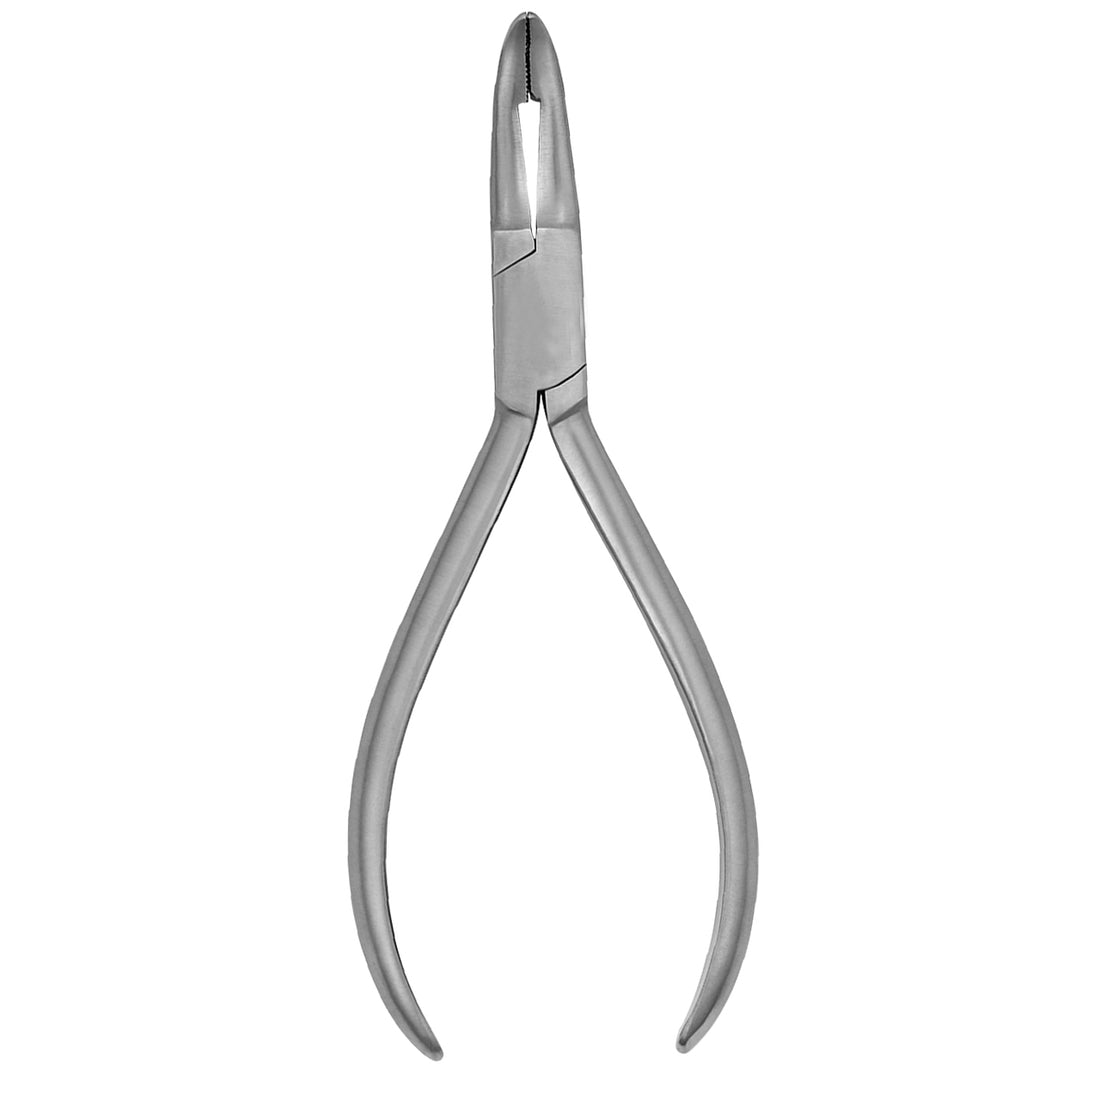 Weingart Pliers, Lap-Joint Style